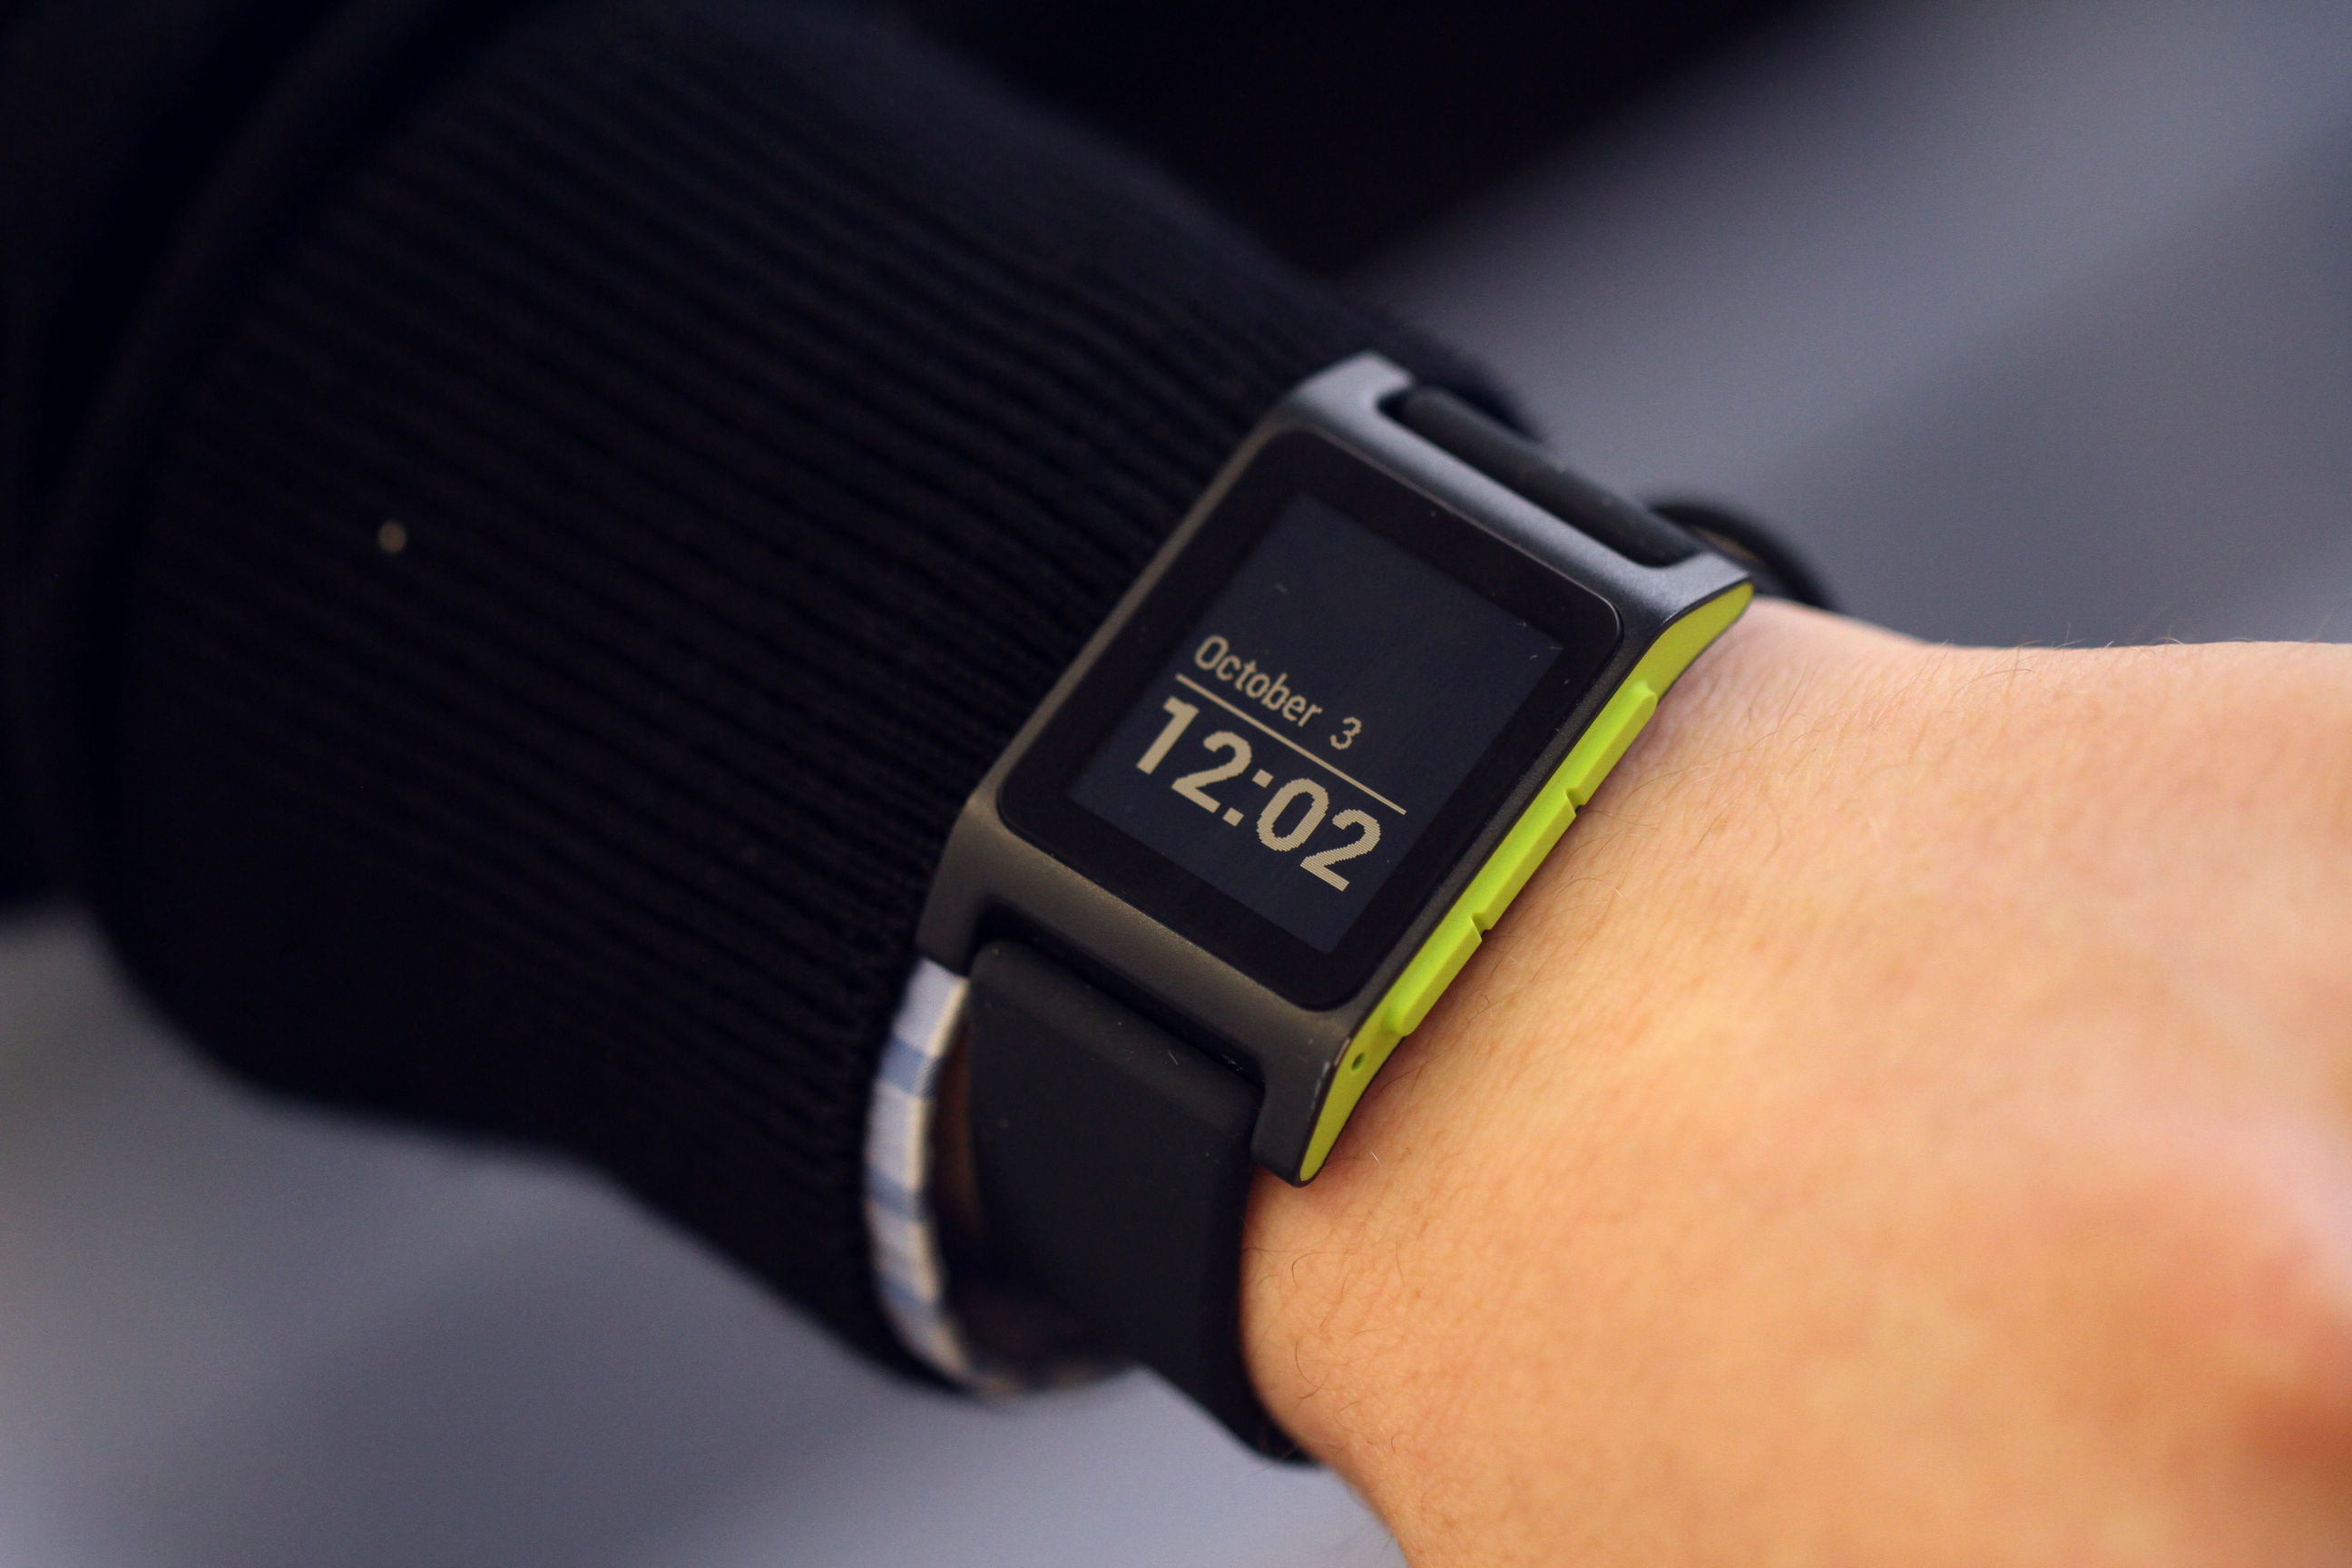 pebble acquired by fitbit